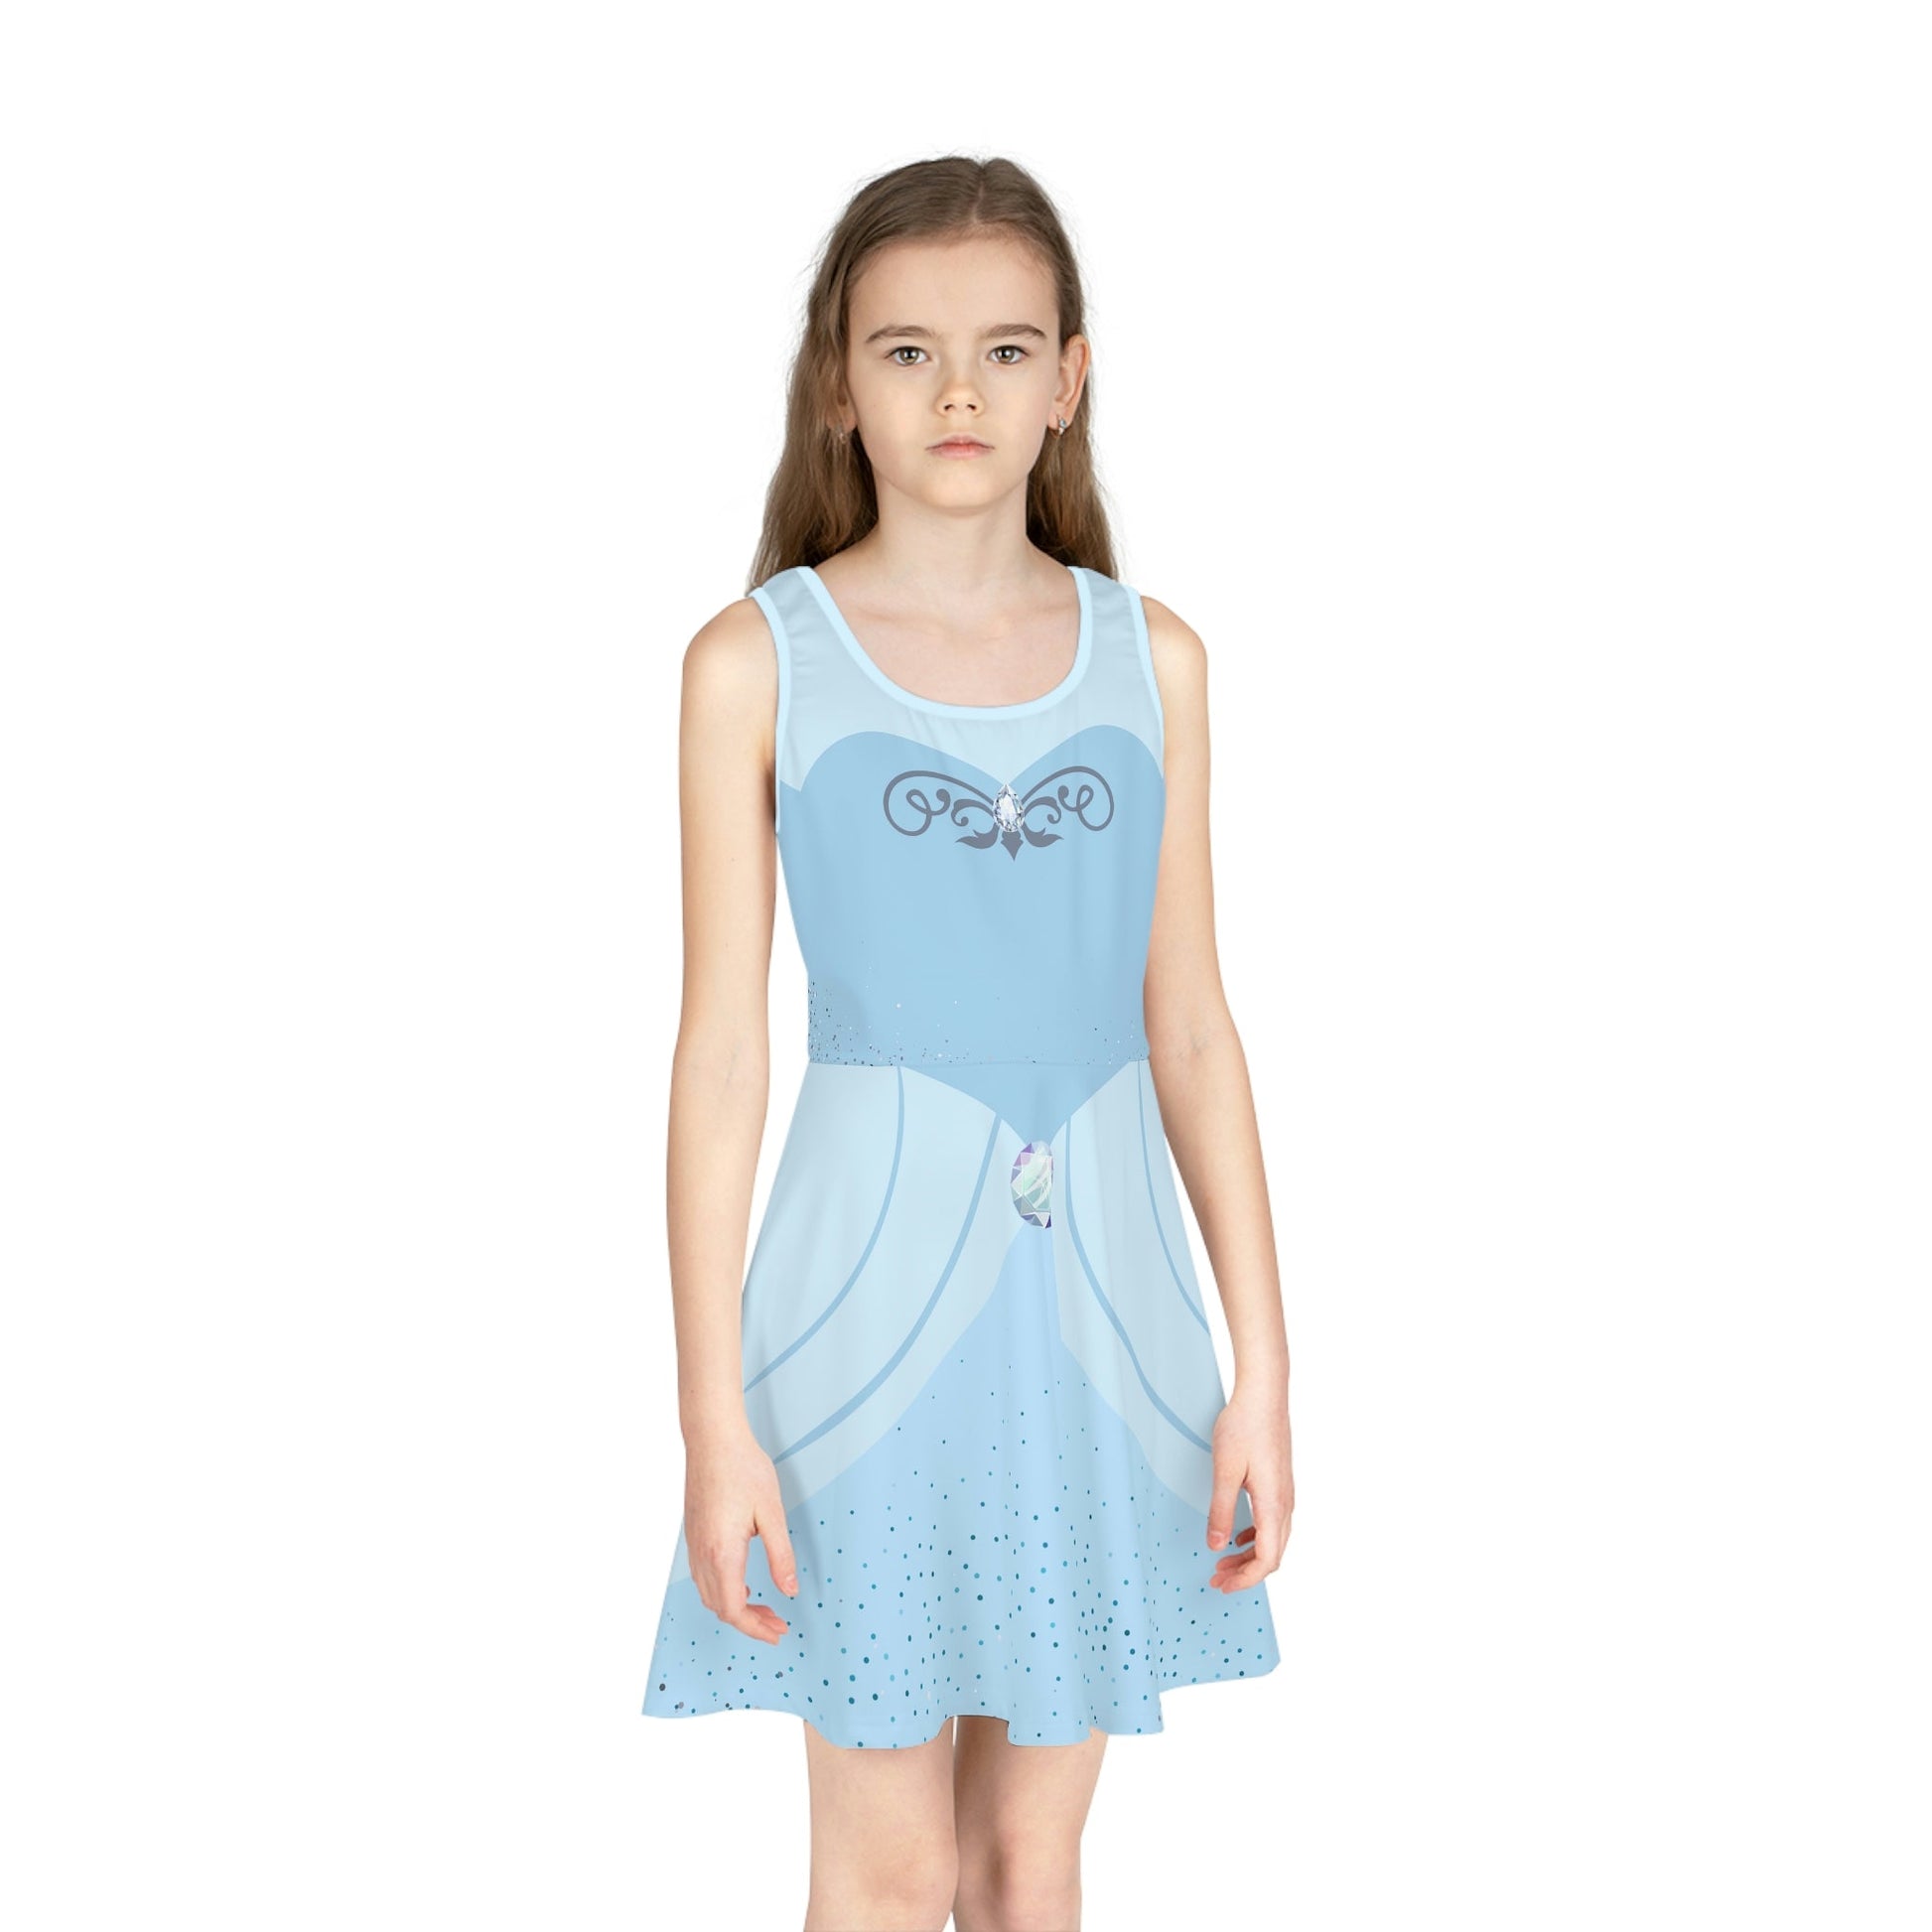 Does the Shoe Fit? Girls' Sleeveless Sundress All Over PrintAOPAOP Clothing#tag4##tag5##tag6#